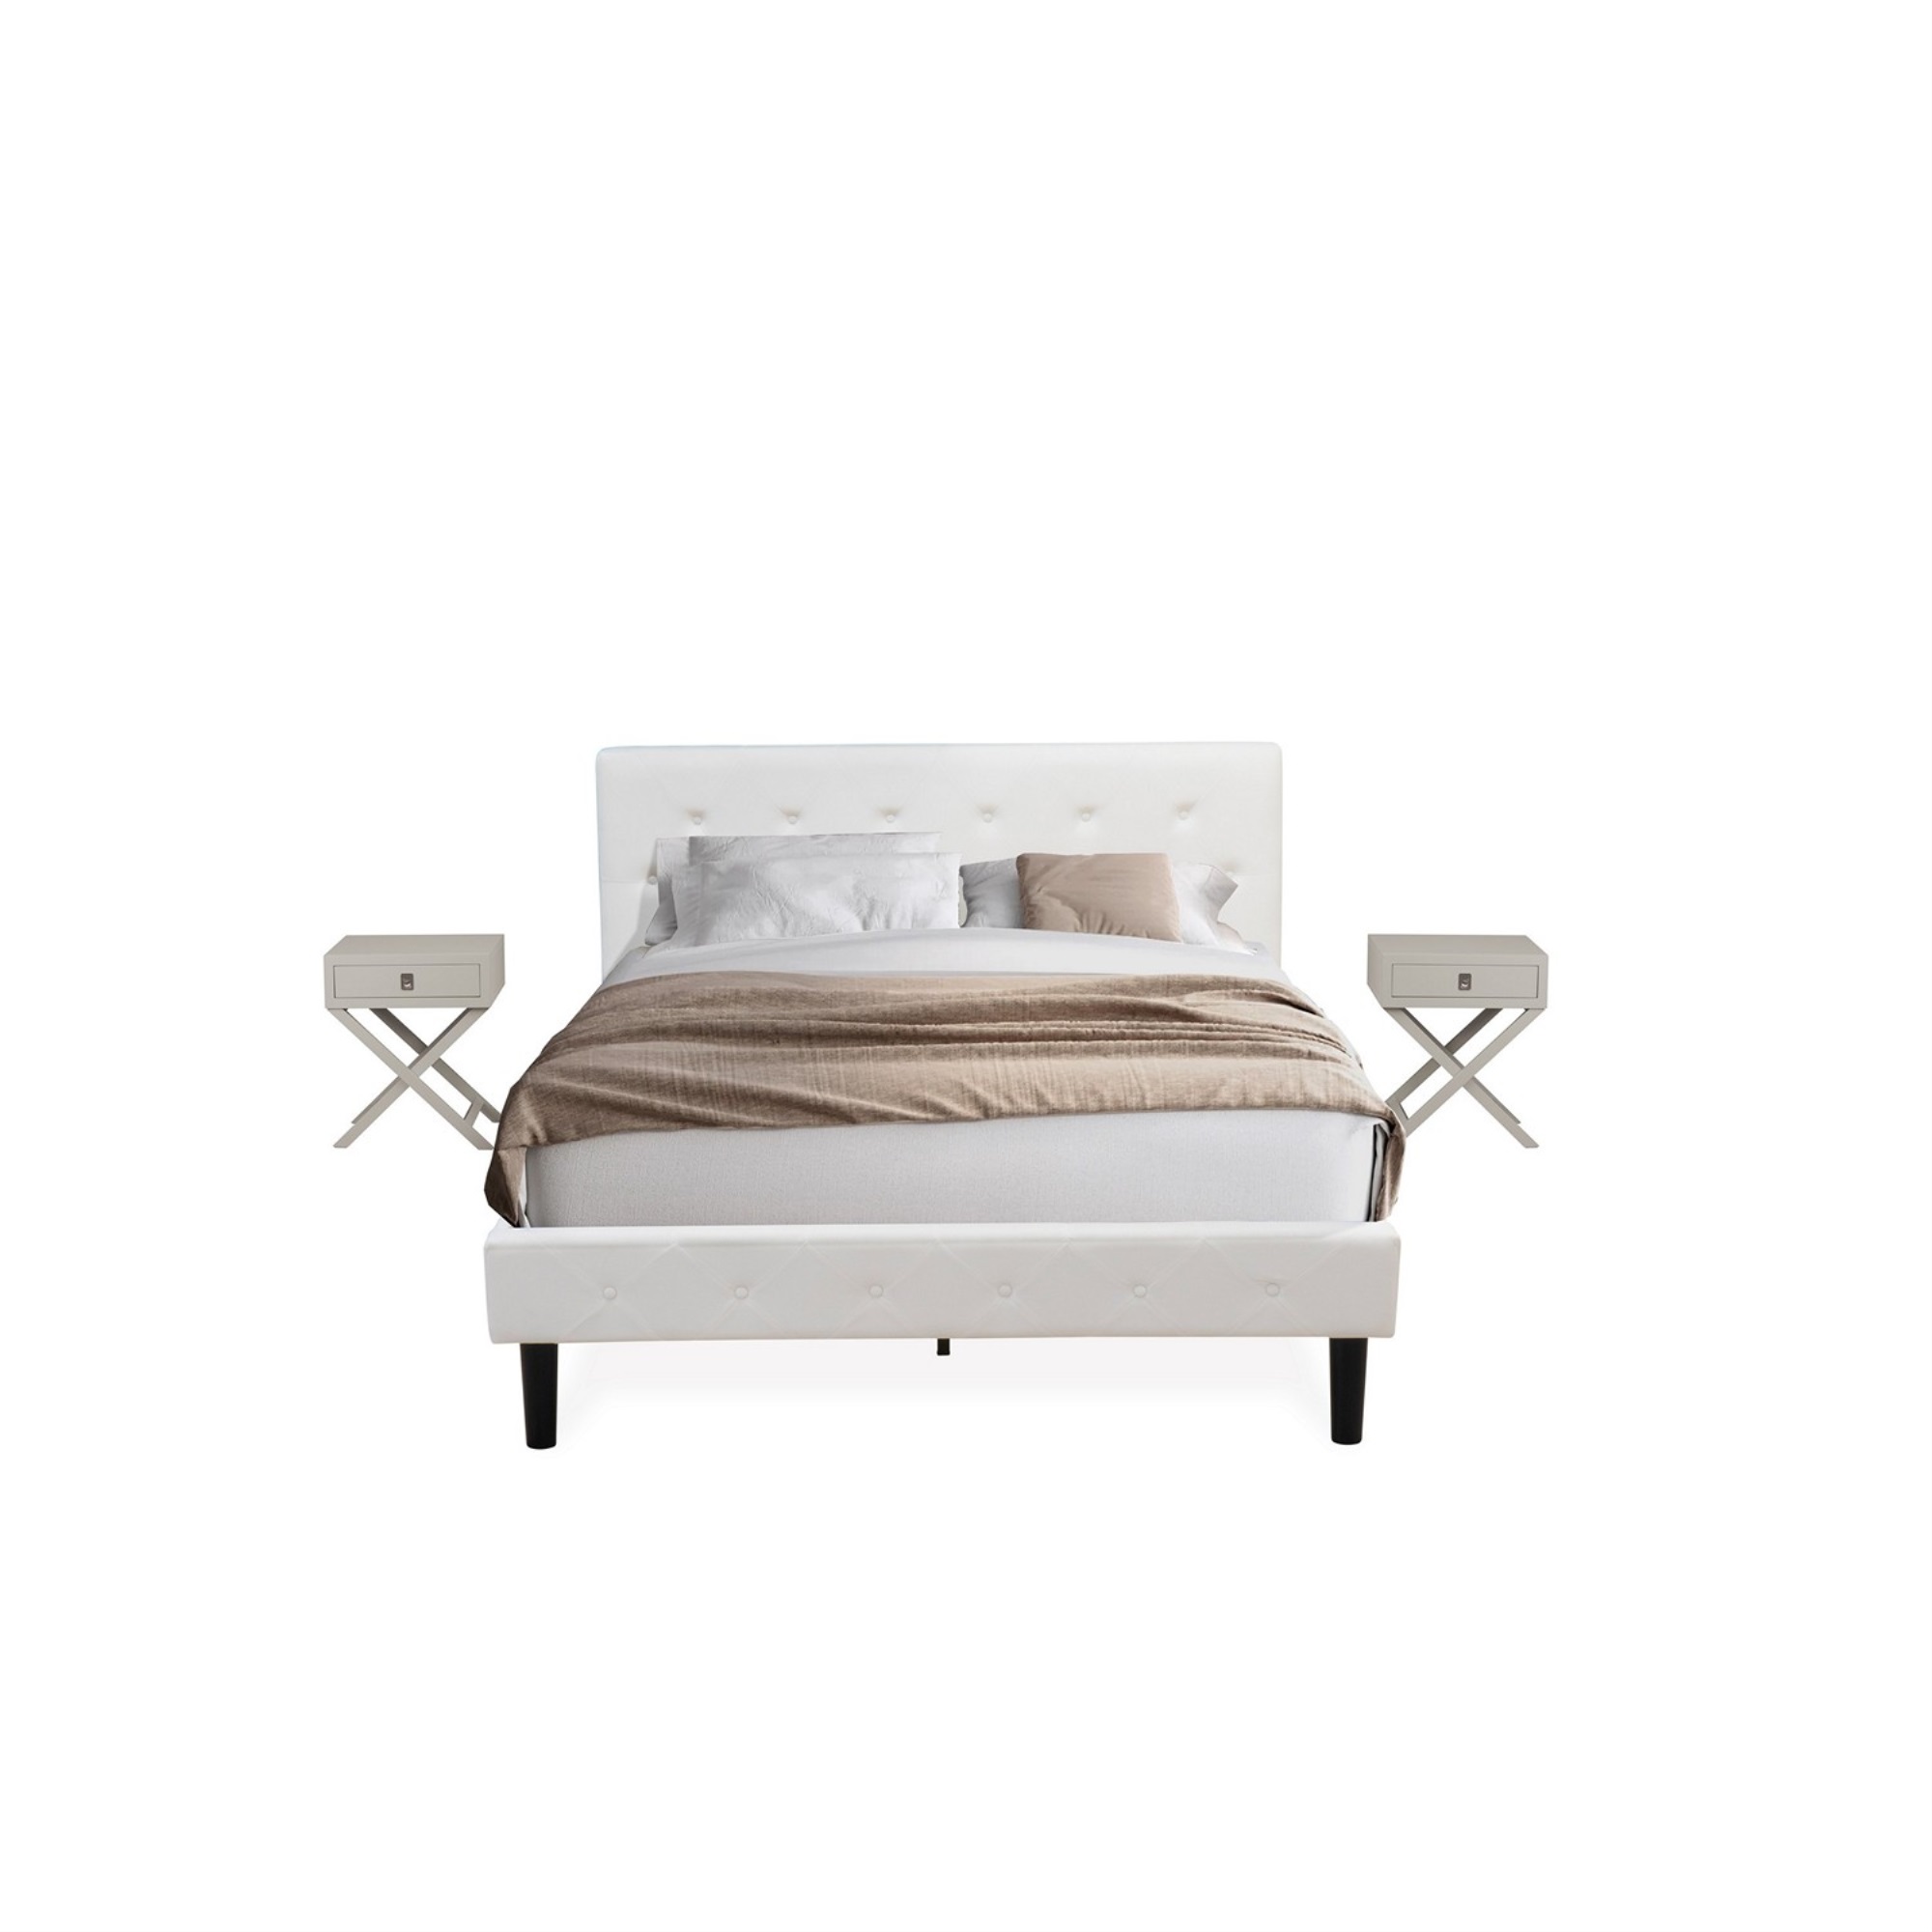 East West Furniture NL19Q-2HA14 3 Piece Bed Set - Button Tufted Queen Size Bed frame - White Velvet Fabric Upholstered Headboard and an Urban Gray